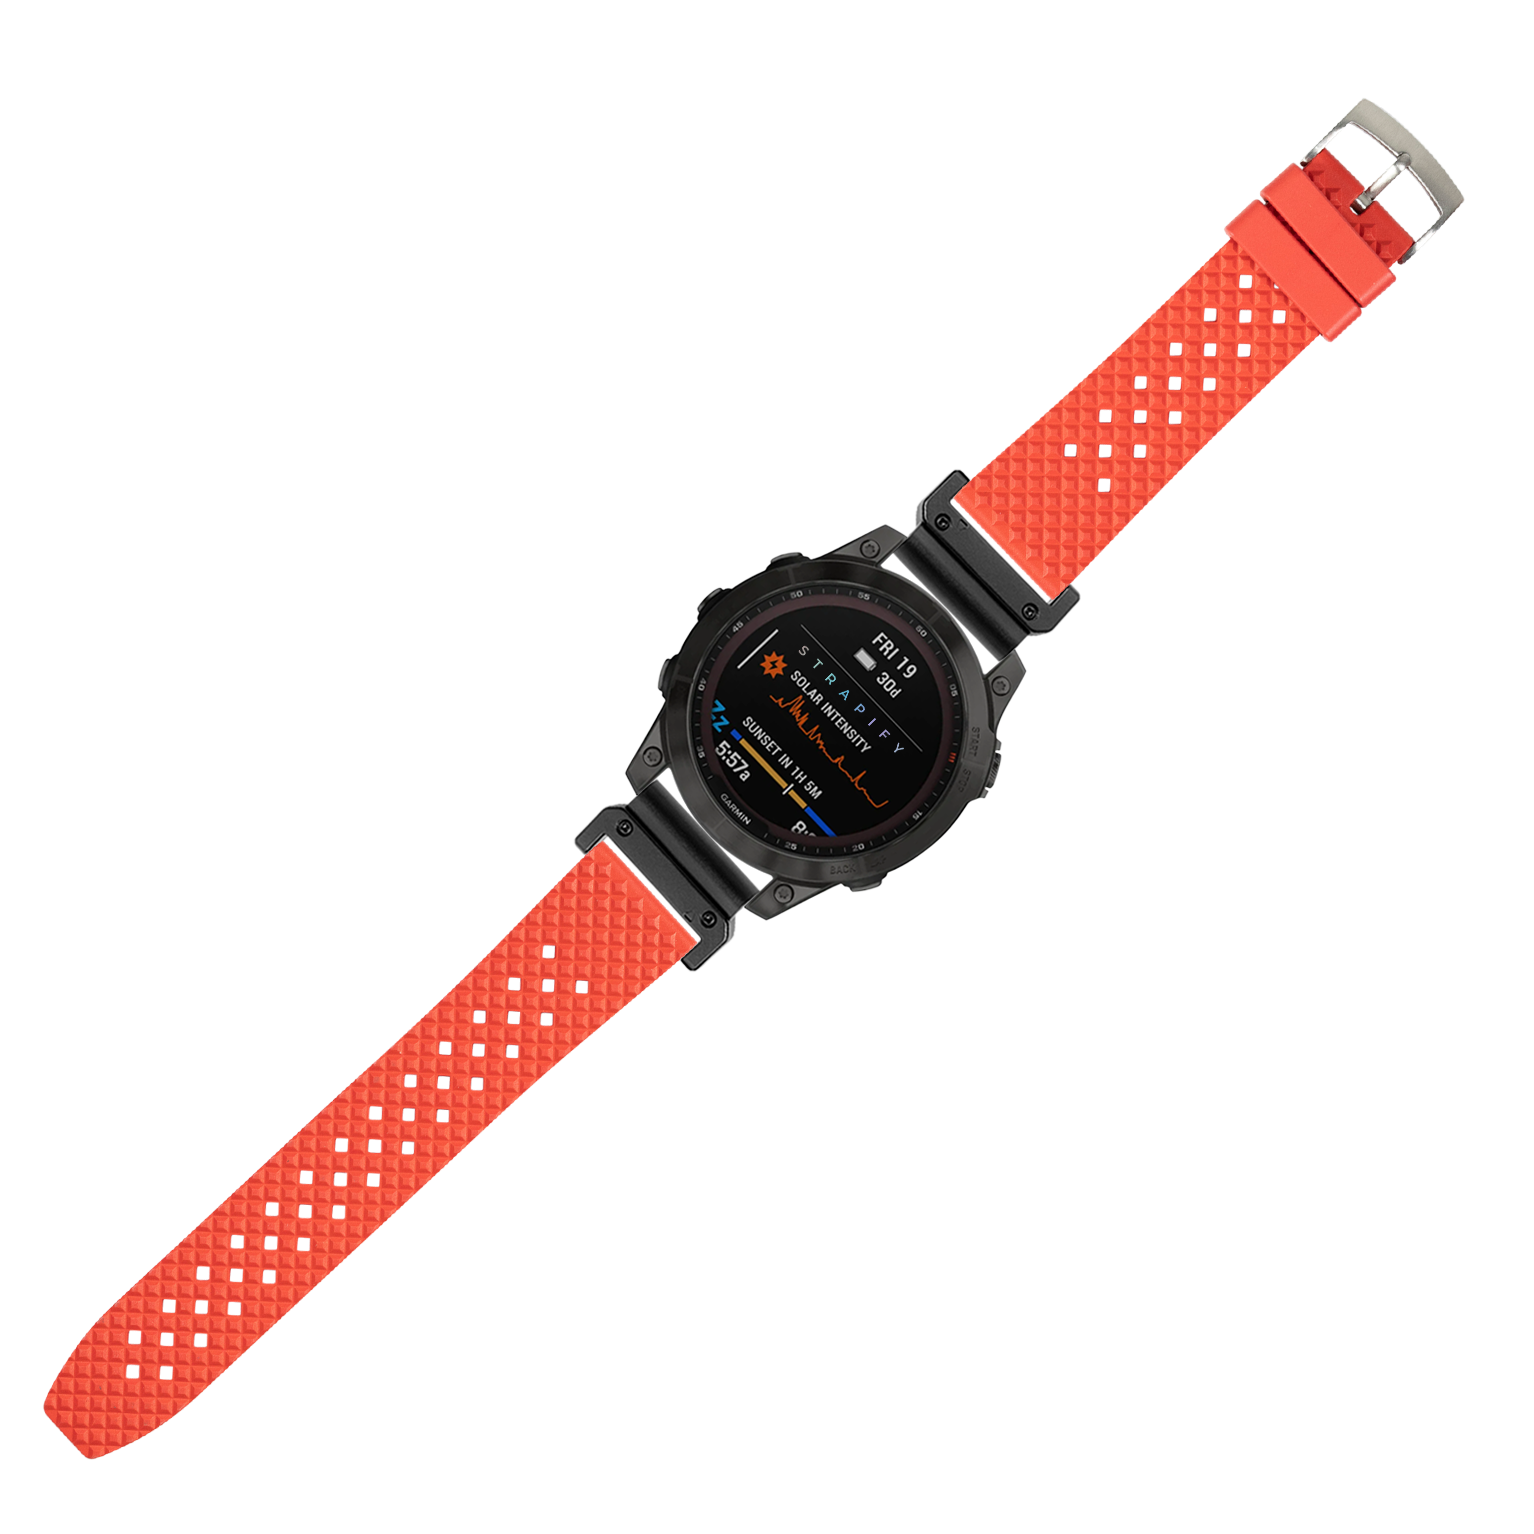 [QuickFit] King Honeycomb FKM Rubber - Red 26mm